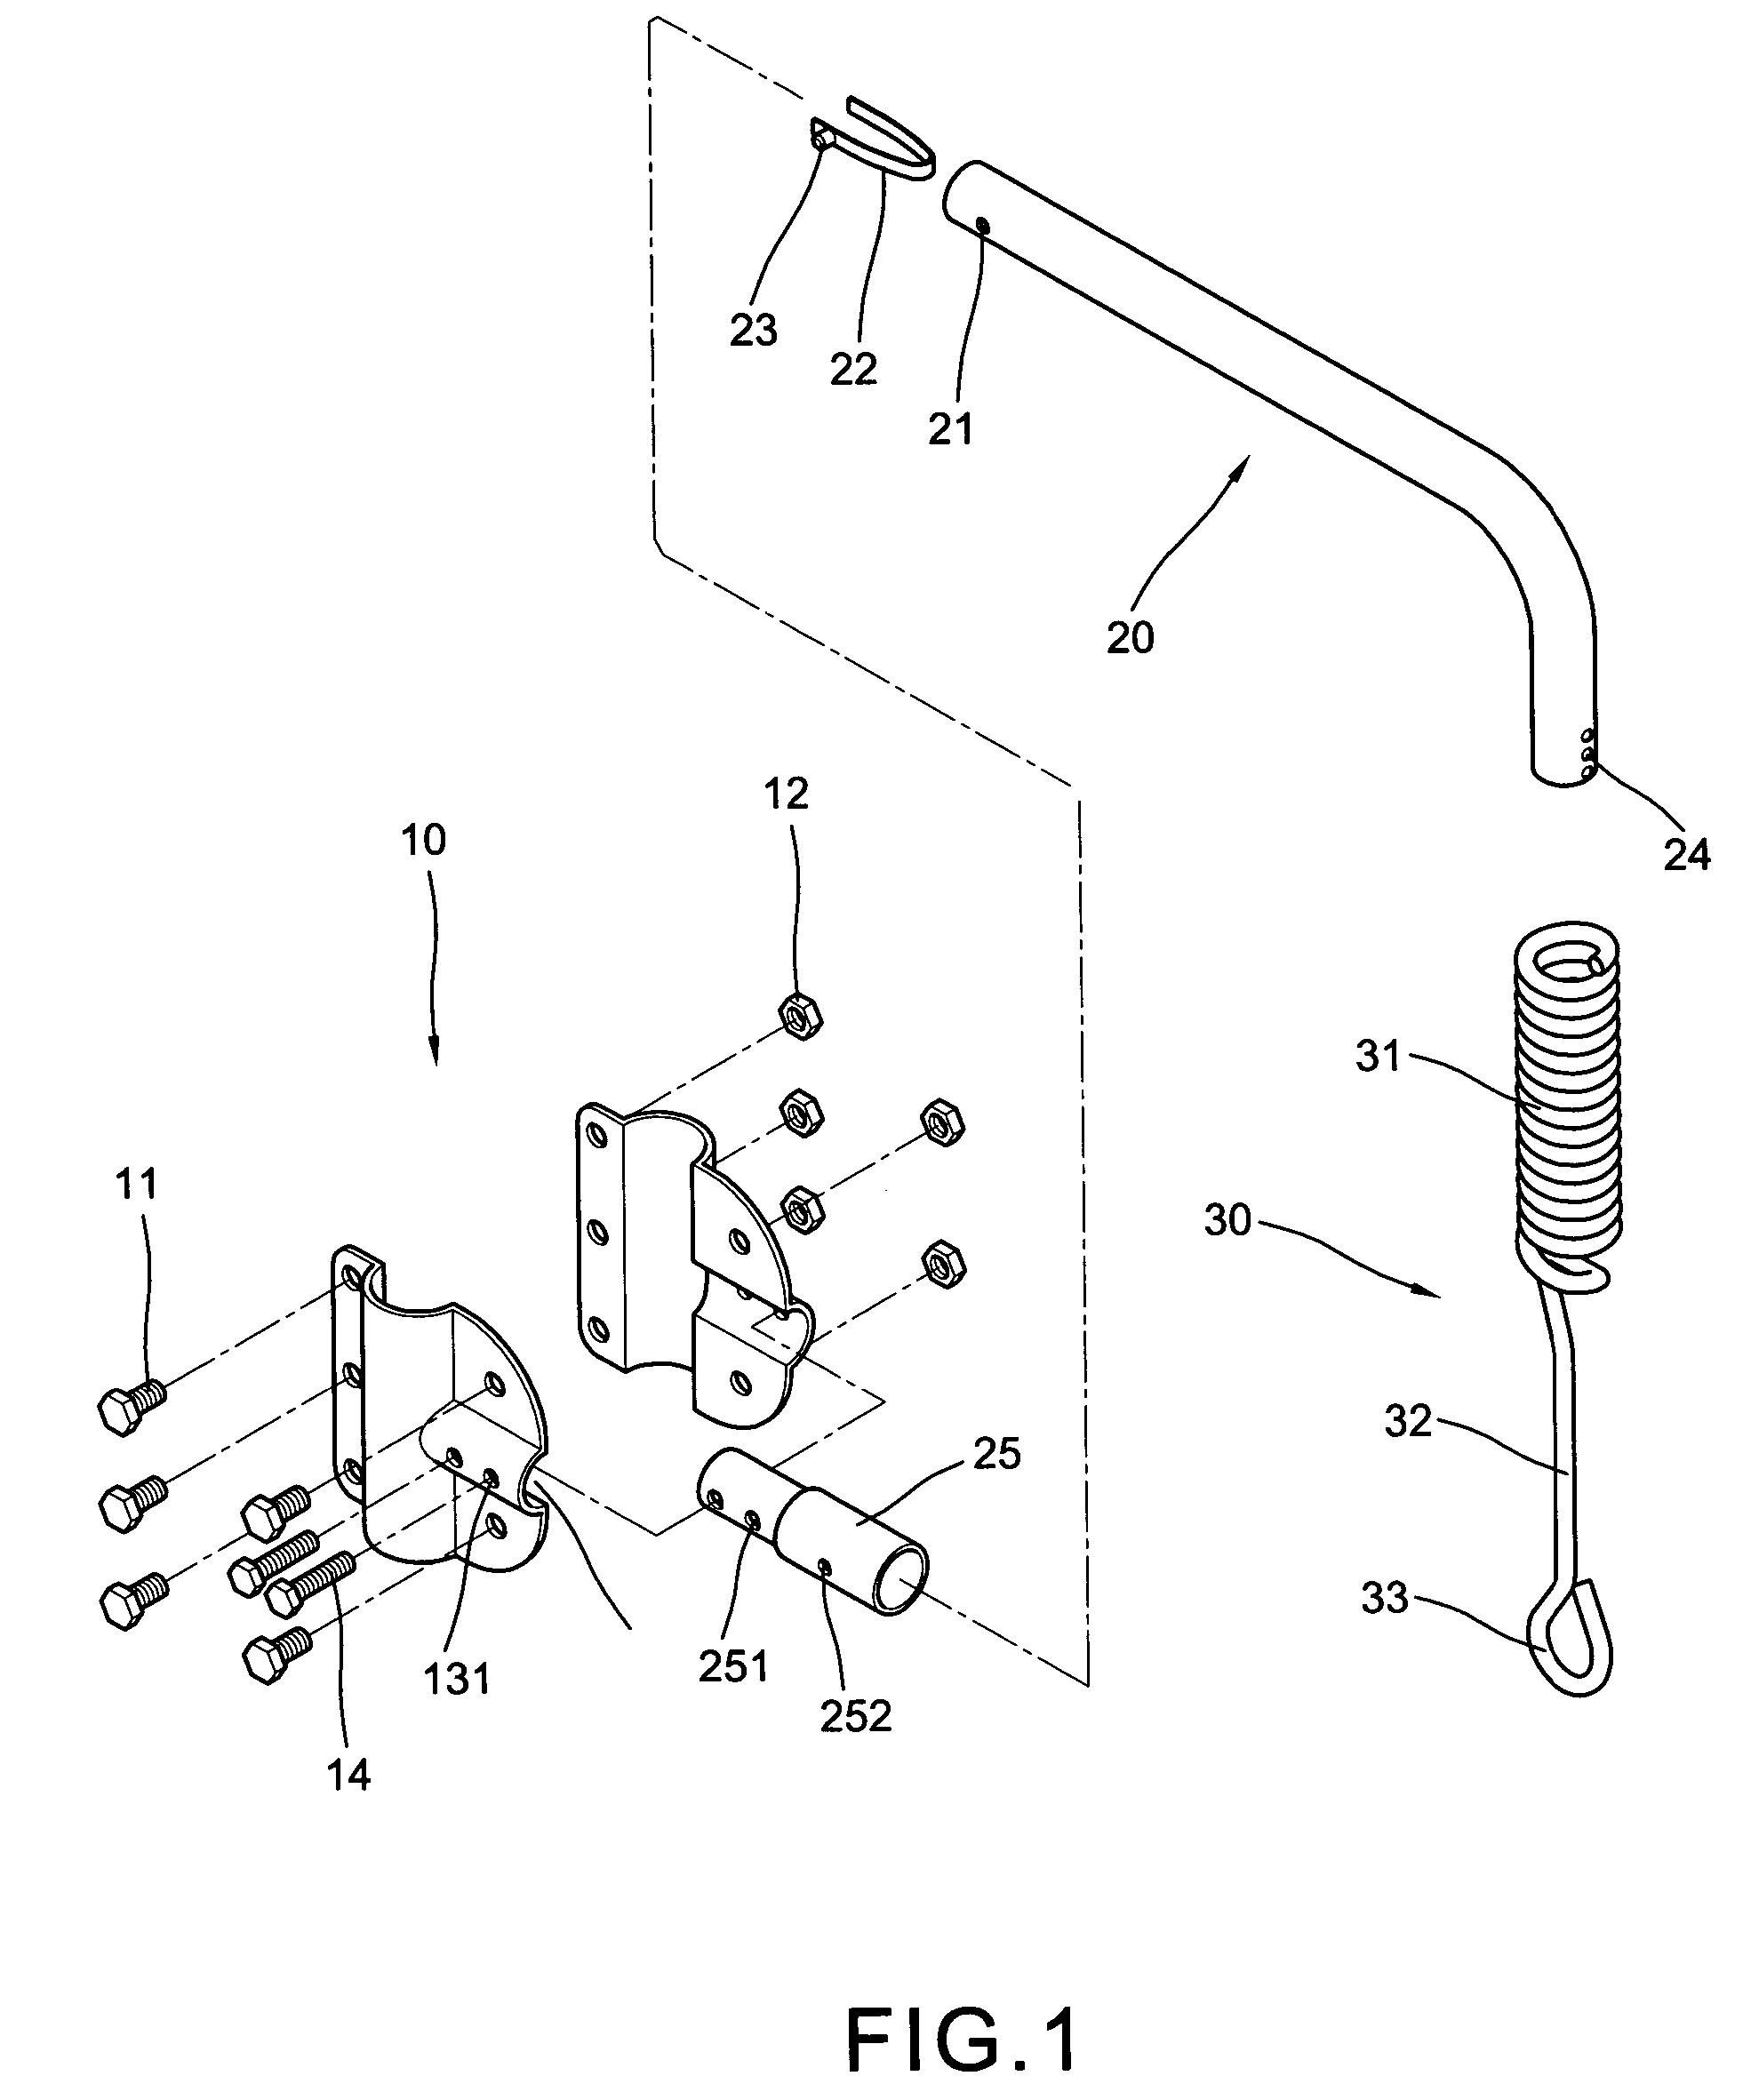 Device attached on bicycles for walking dogs